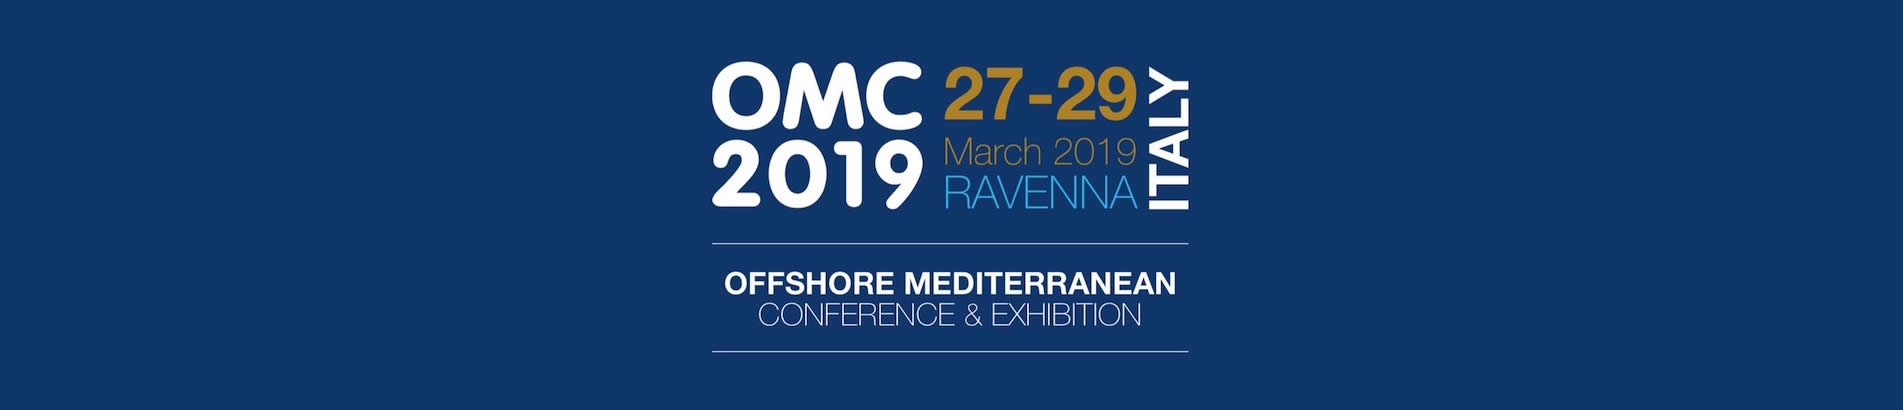 OMC 2019 - 27/29 MARCH 2019 ITALY